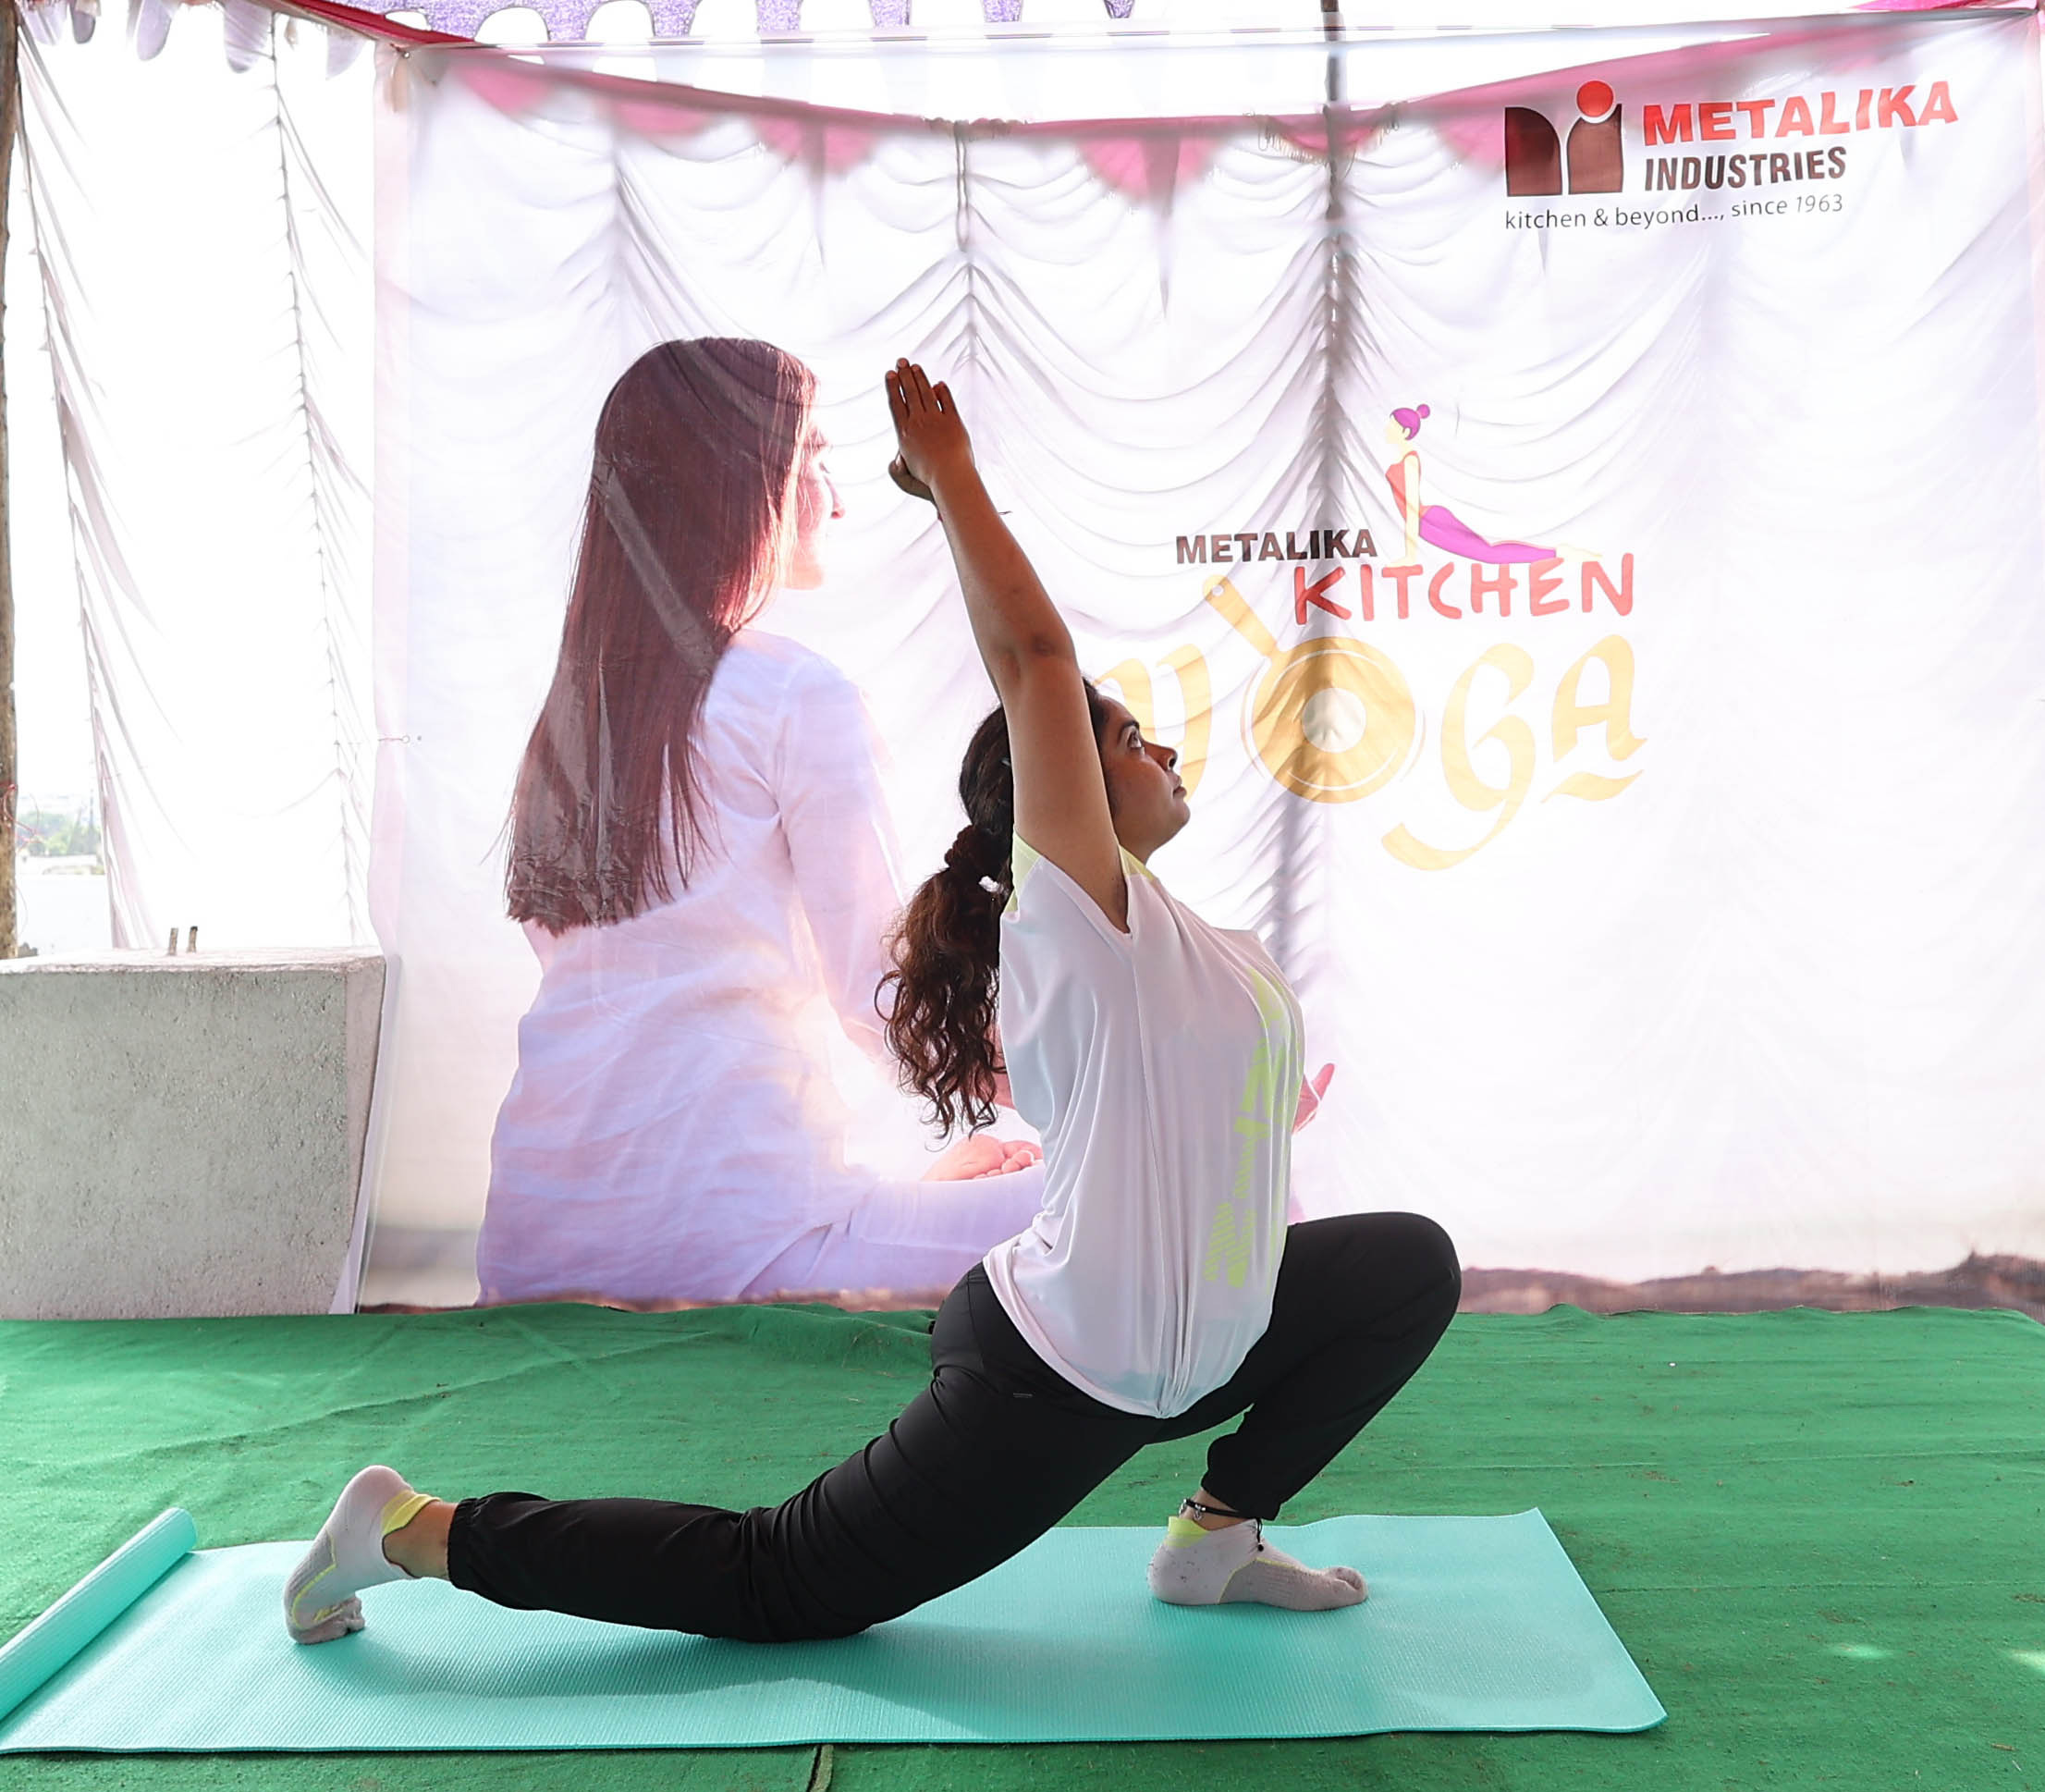 World Yoga Day witnesses a unique Session, Metalika Kitchen Yoga, highlighting kitchen utensils to prompt  women to perform simple yoga asanas!